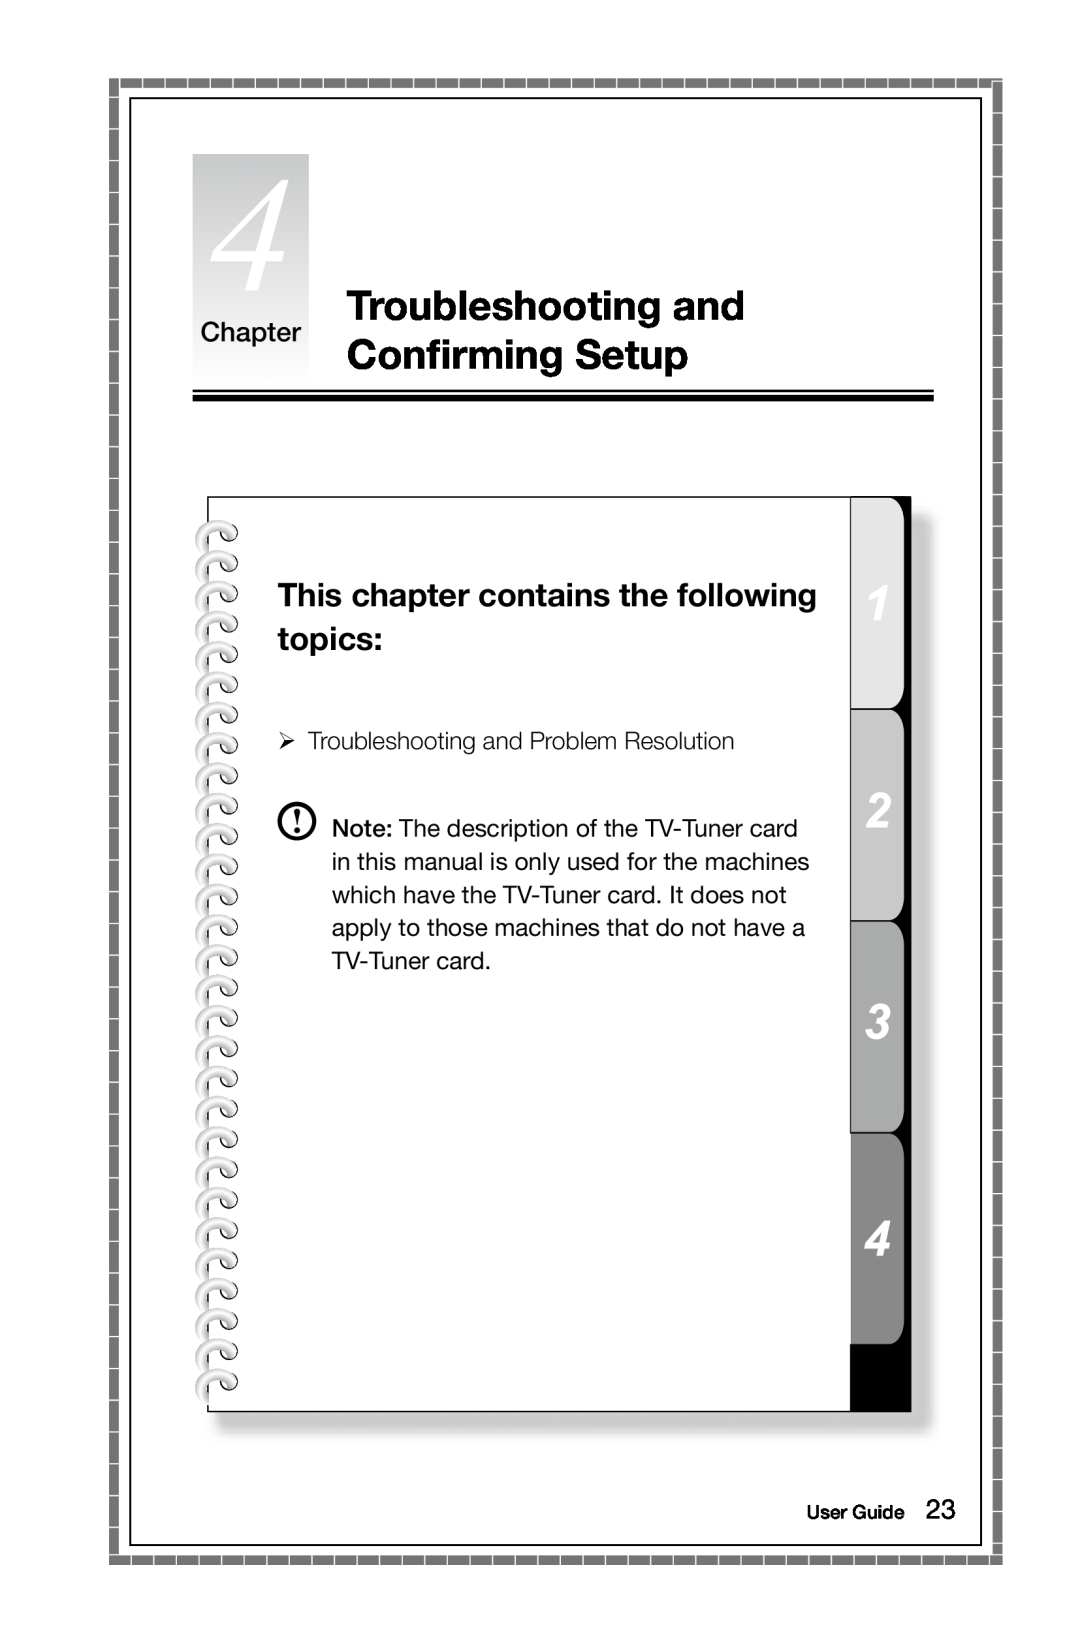 Lenovo 10091/2558/1196 manual Troubleshooting and Chapter Confirming Setup, This chapter contains the following topics 